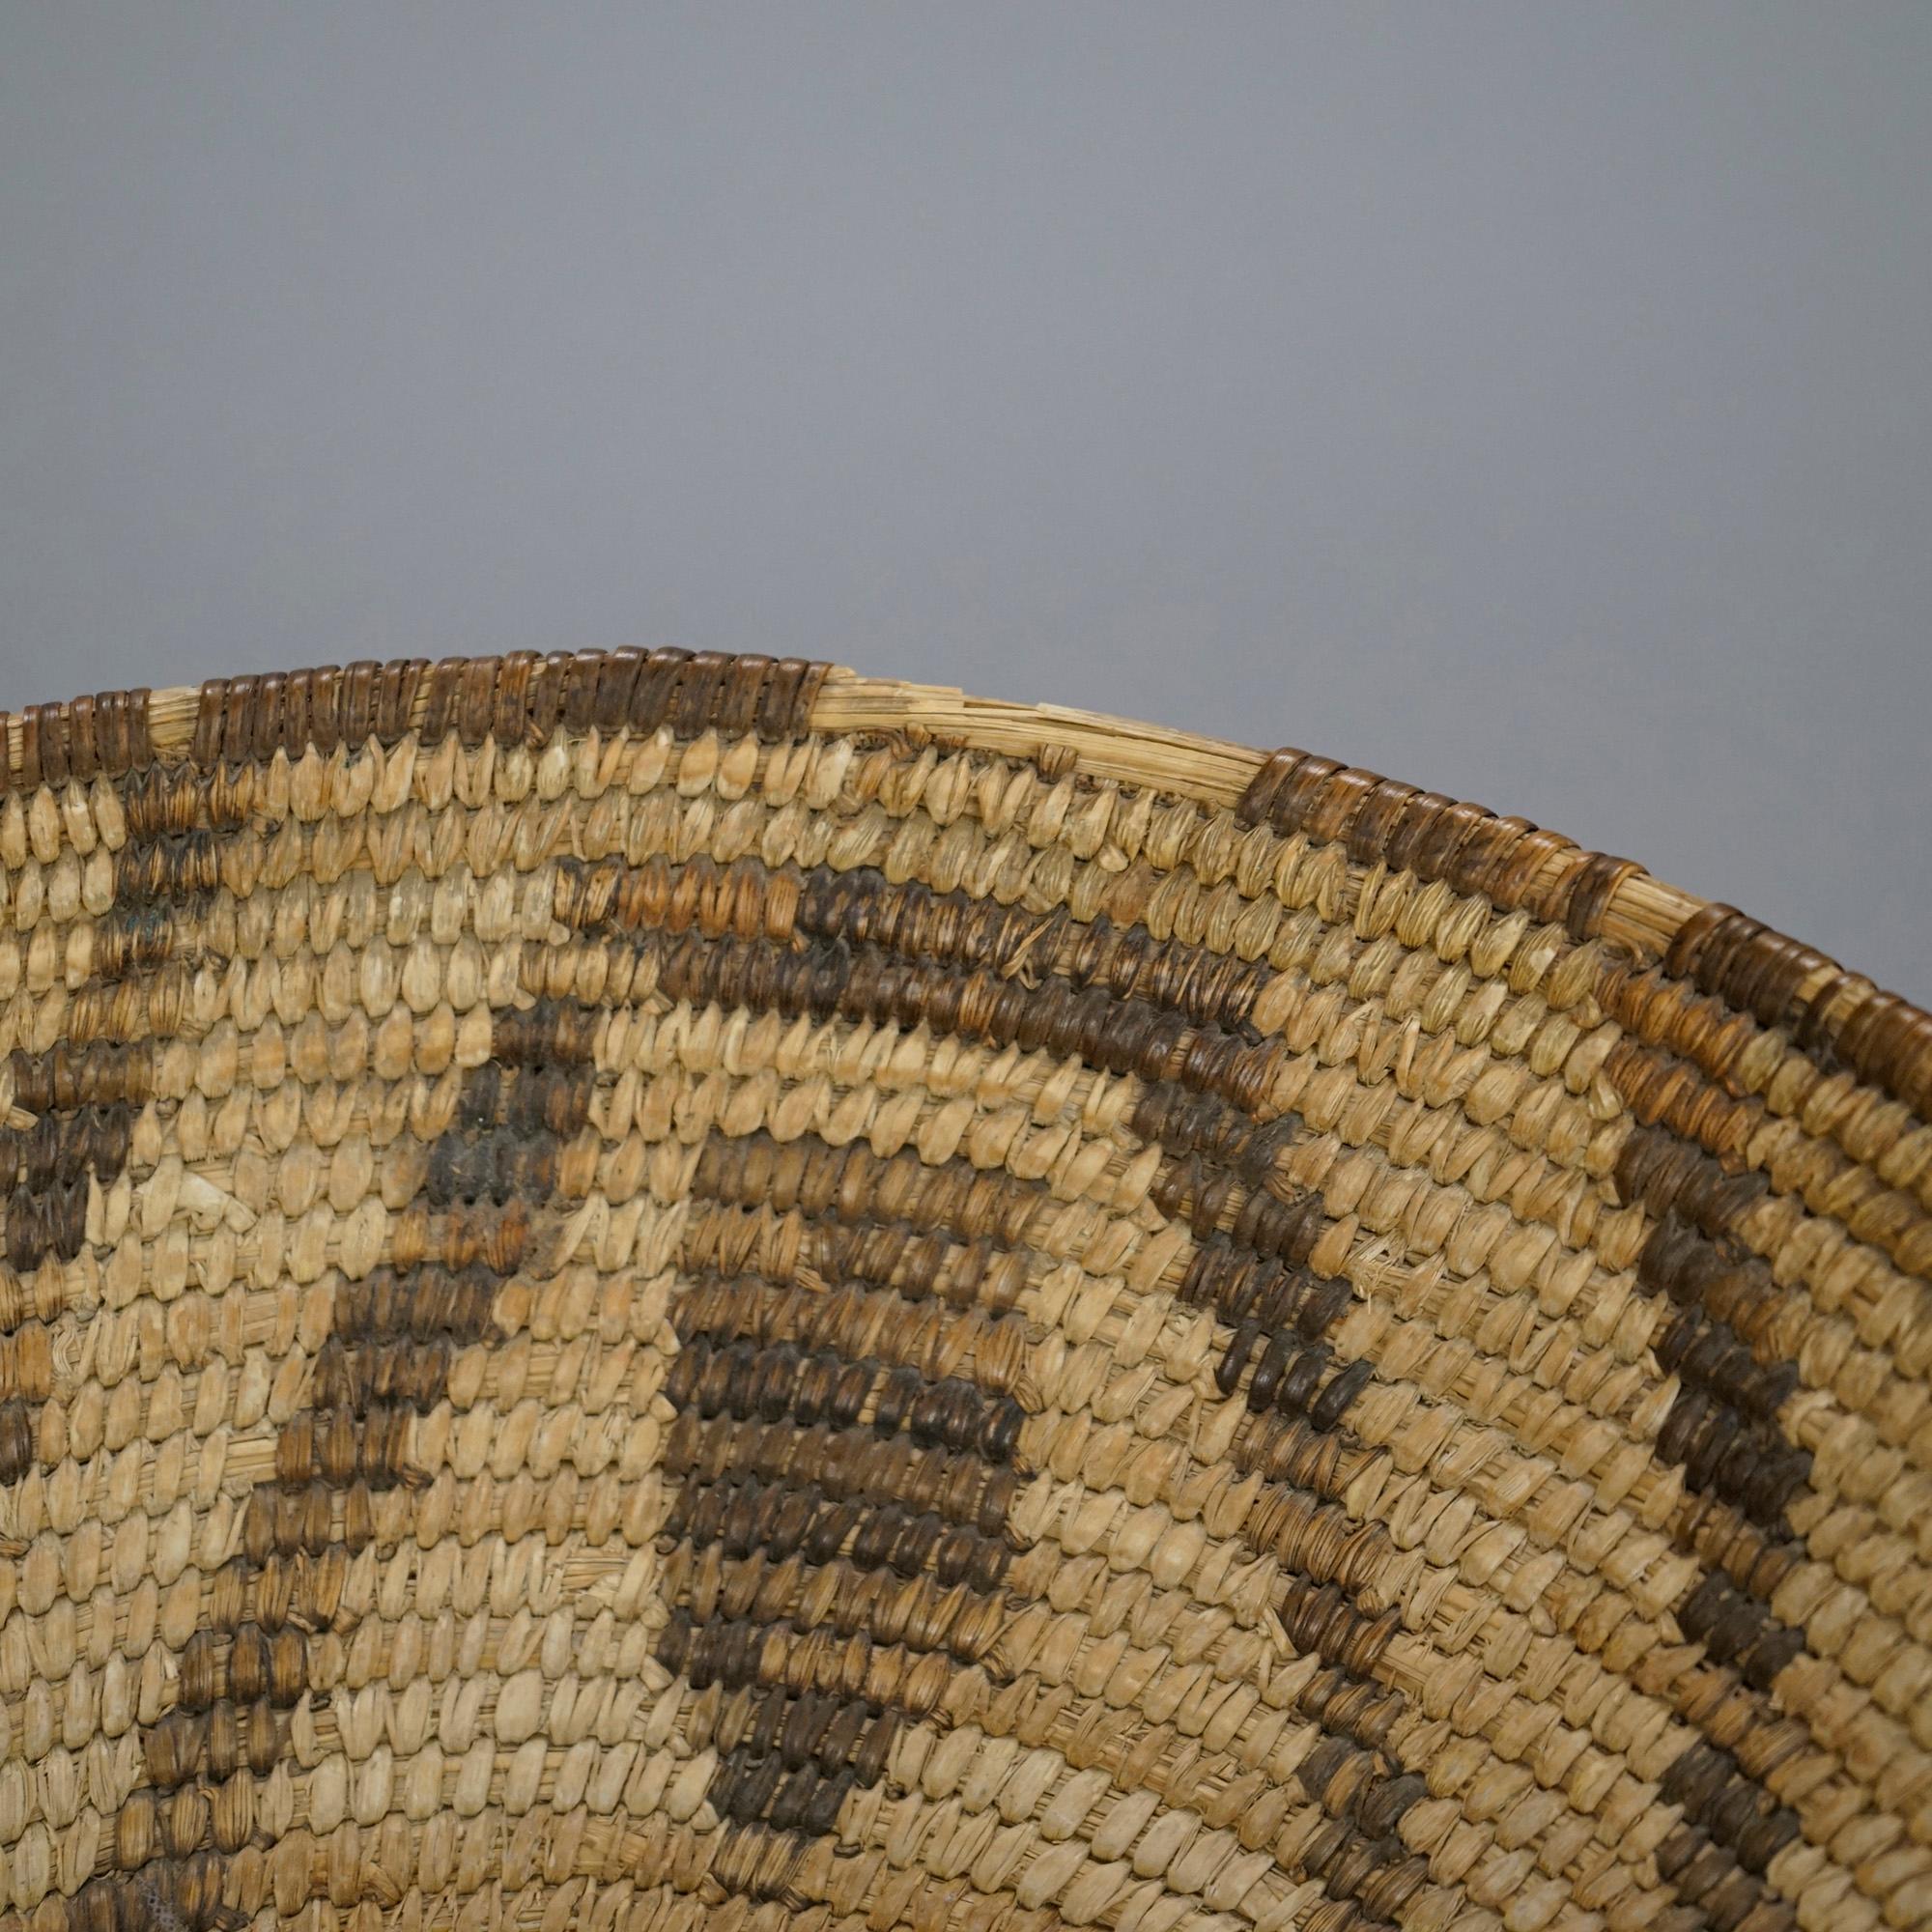 Antique Southwestern American Indian Basket with Geometric Design c1920 4